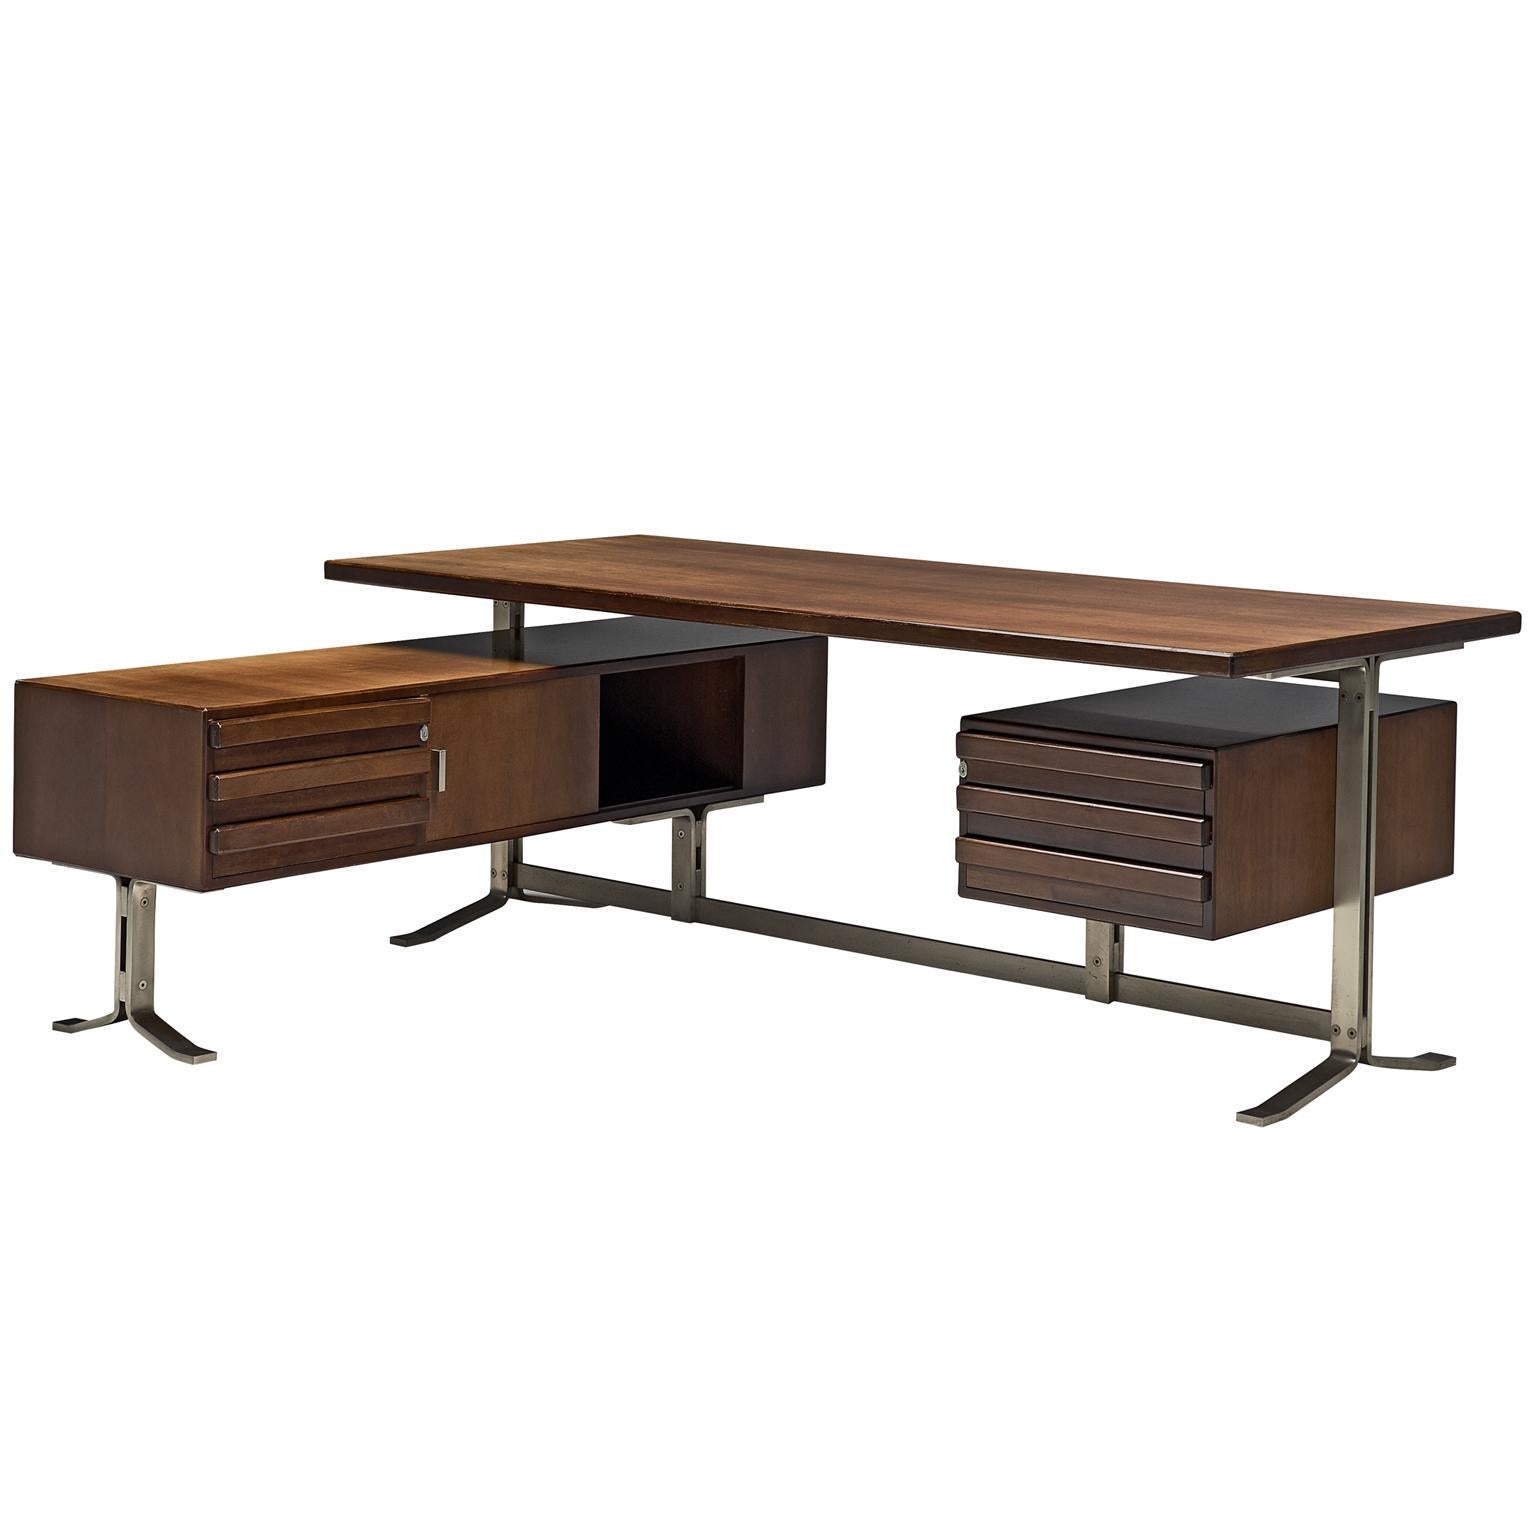 Italian Desk with Retour in Walnut and Metal